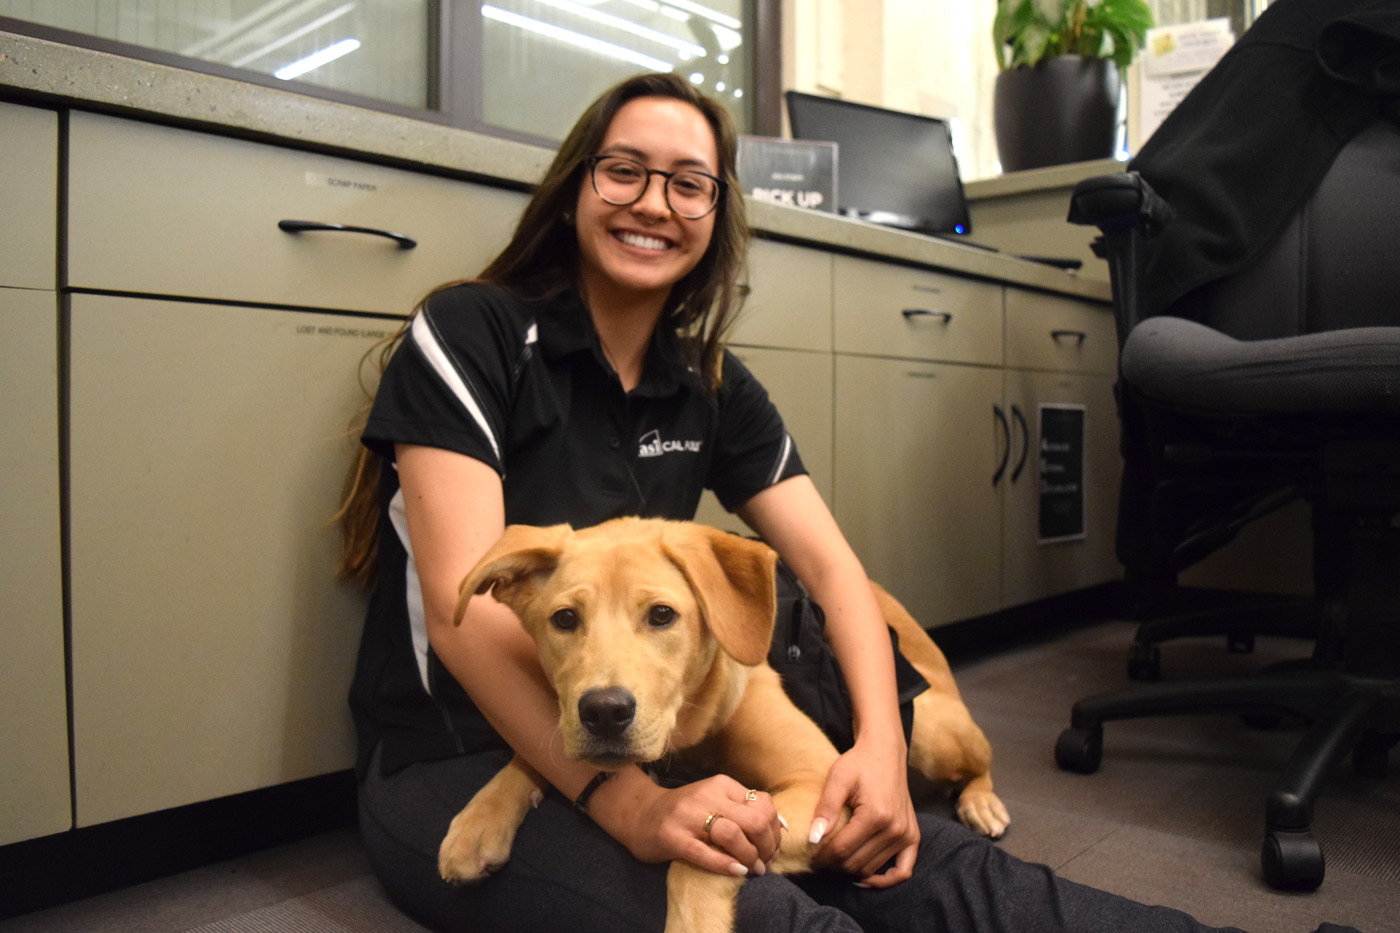 “I decided to get a service dog because I have what is considered a mental disability and so he assists me with that. In this case emotional support animals only support you emotionally whereas service animals are necessary for your daily life. It’s kind of like having your best friend with you all the time, 24-7,” animal science sophomore Jordan Chock said. Photo Credit: Sydney Brandt